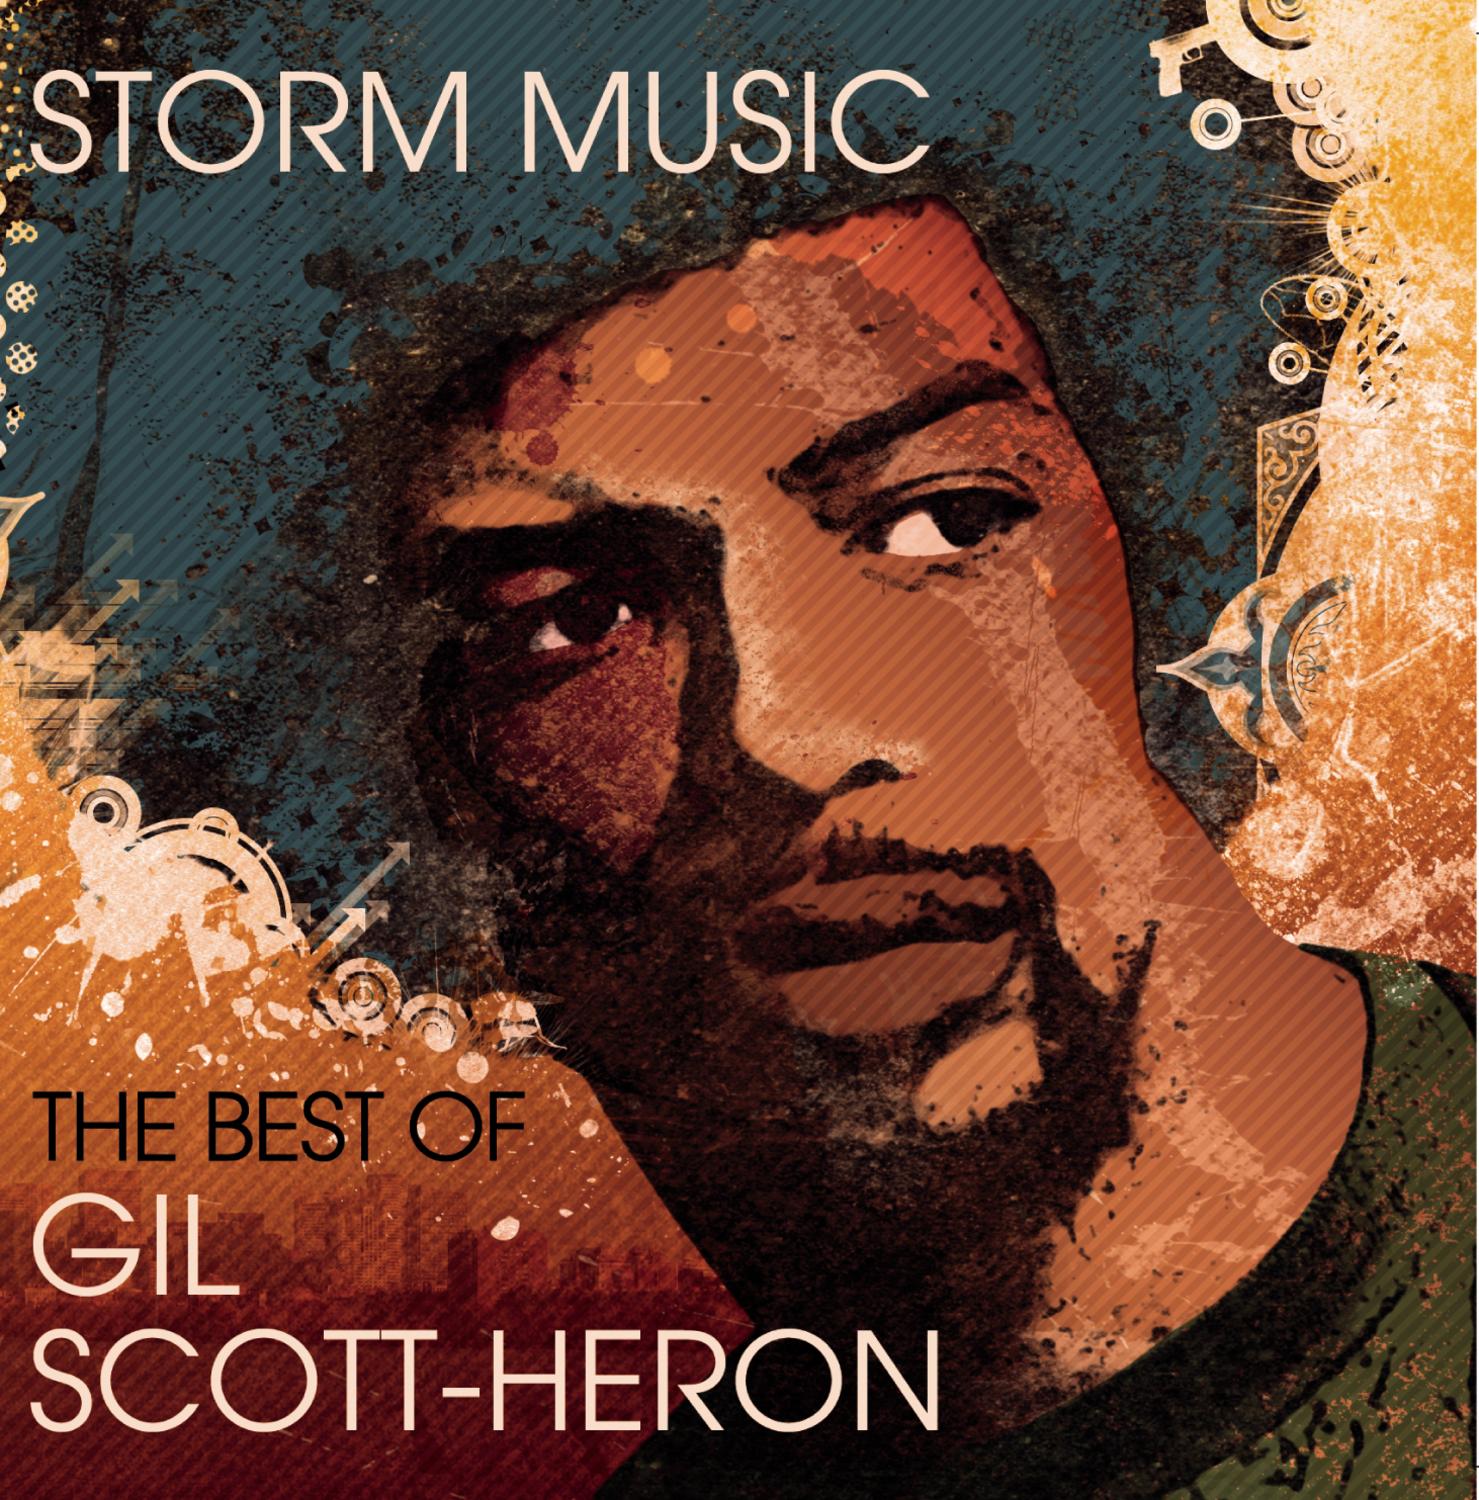 Storm Music "The Best Of"